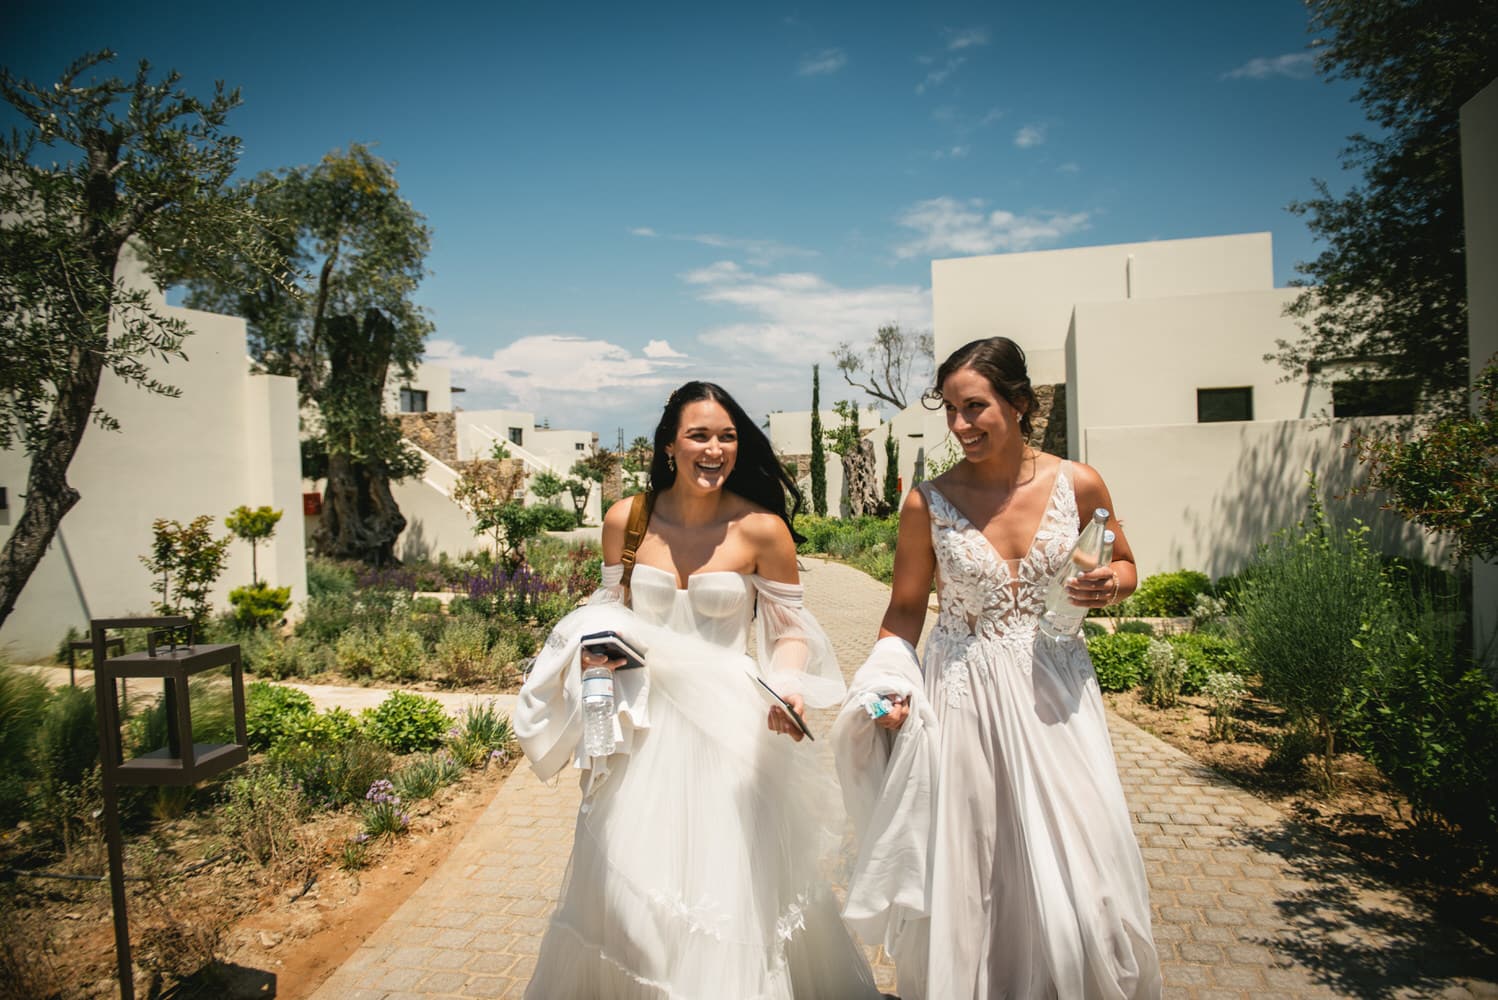 Brides walking outside, laughter echoing on their Corfu elopement day.